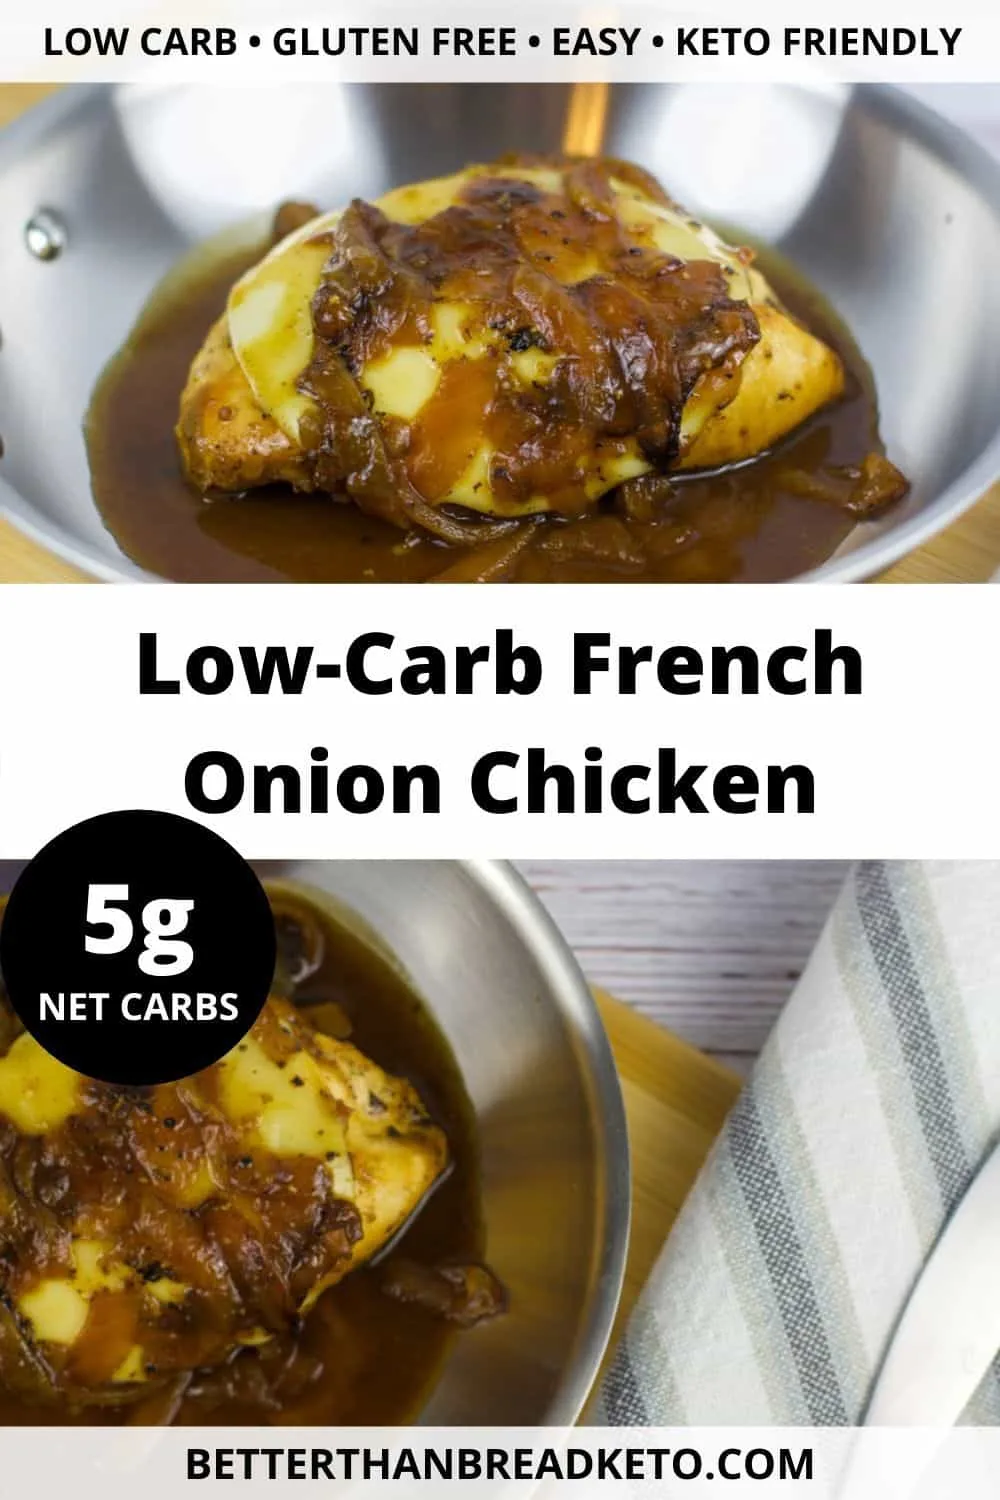 Low-Carb French Onion Chicken